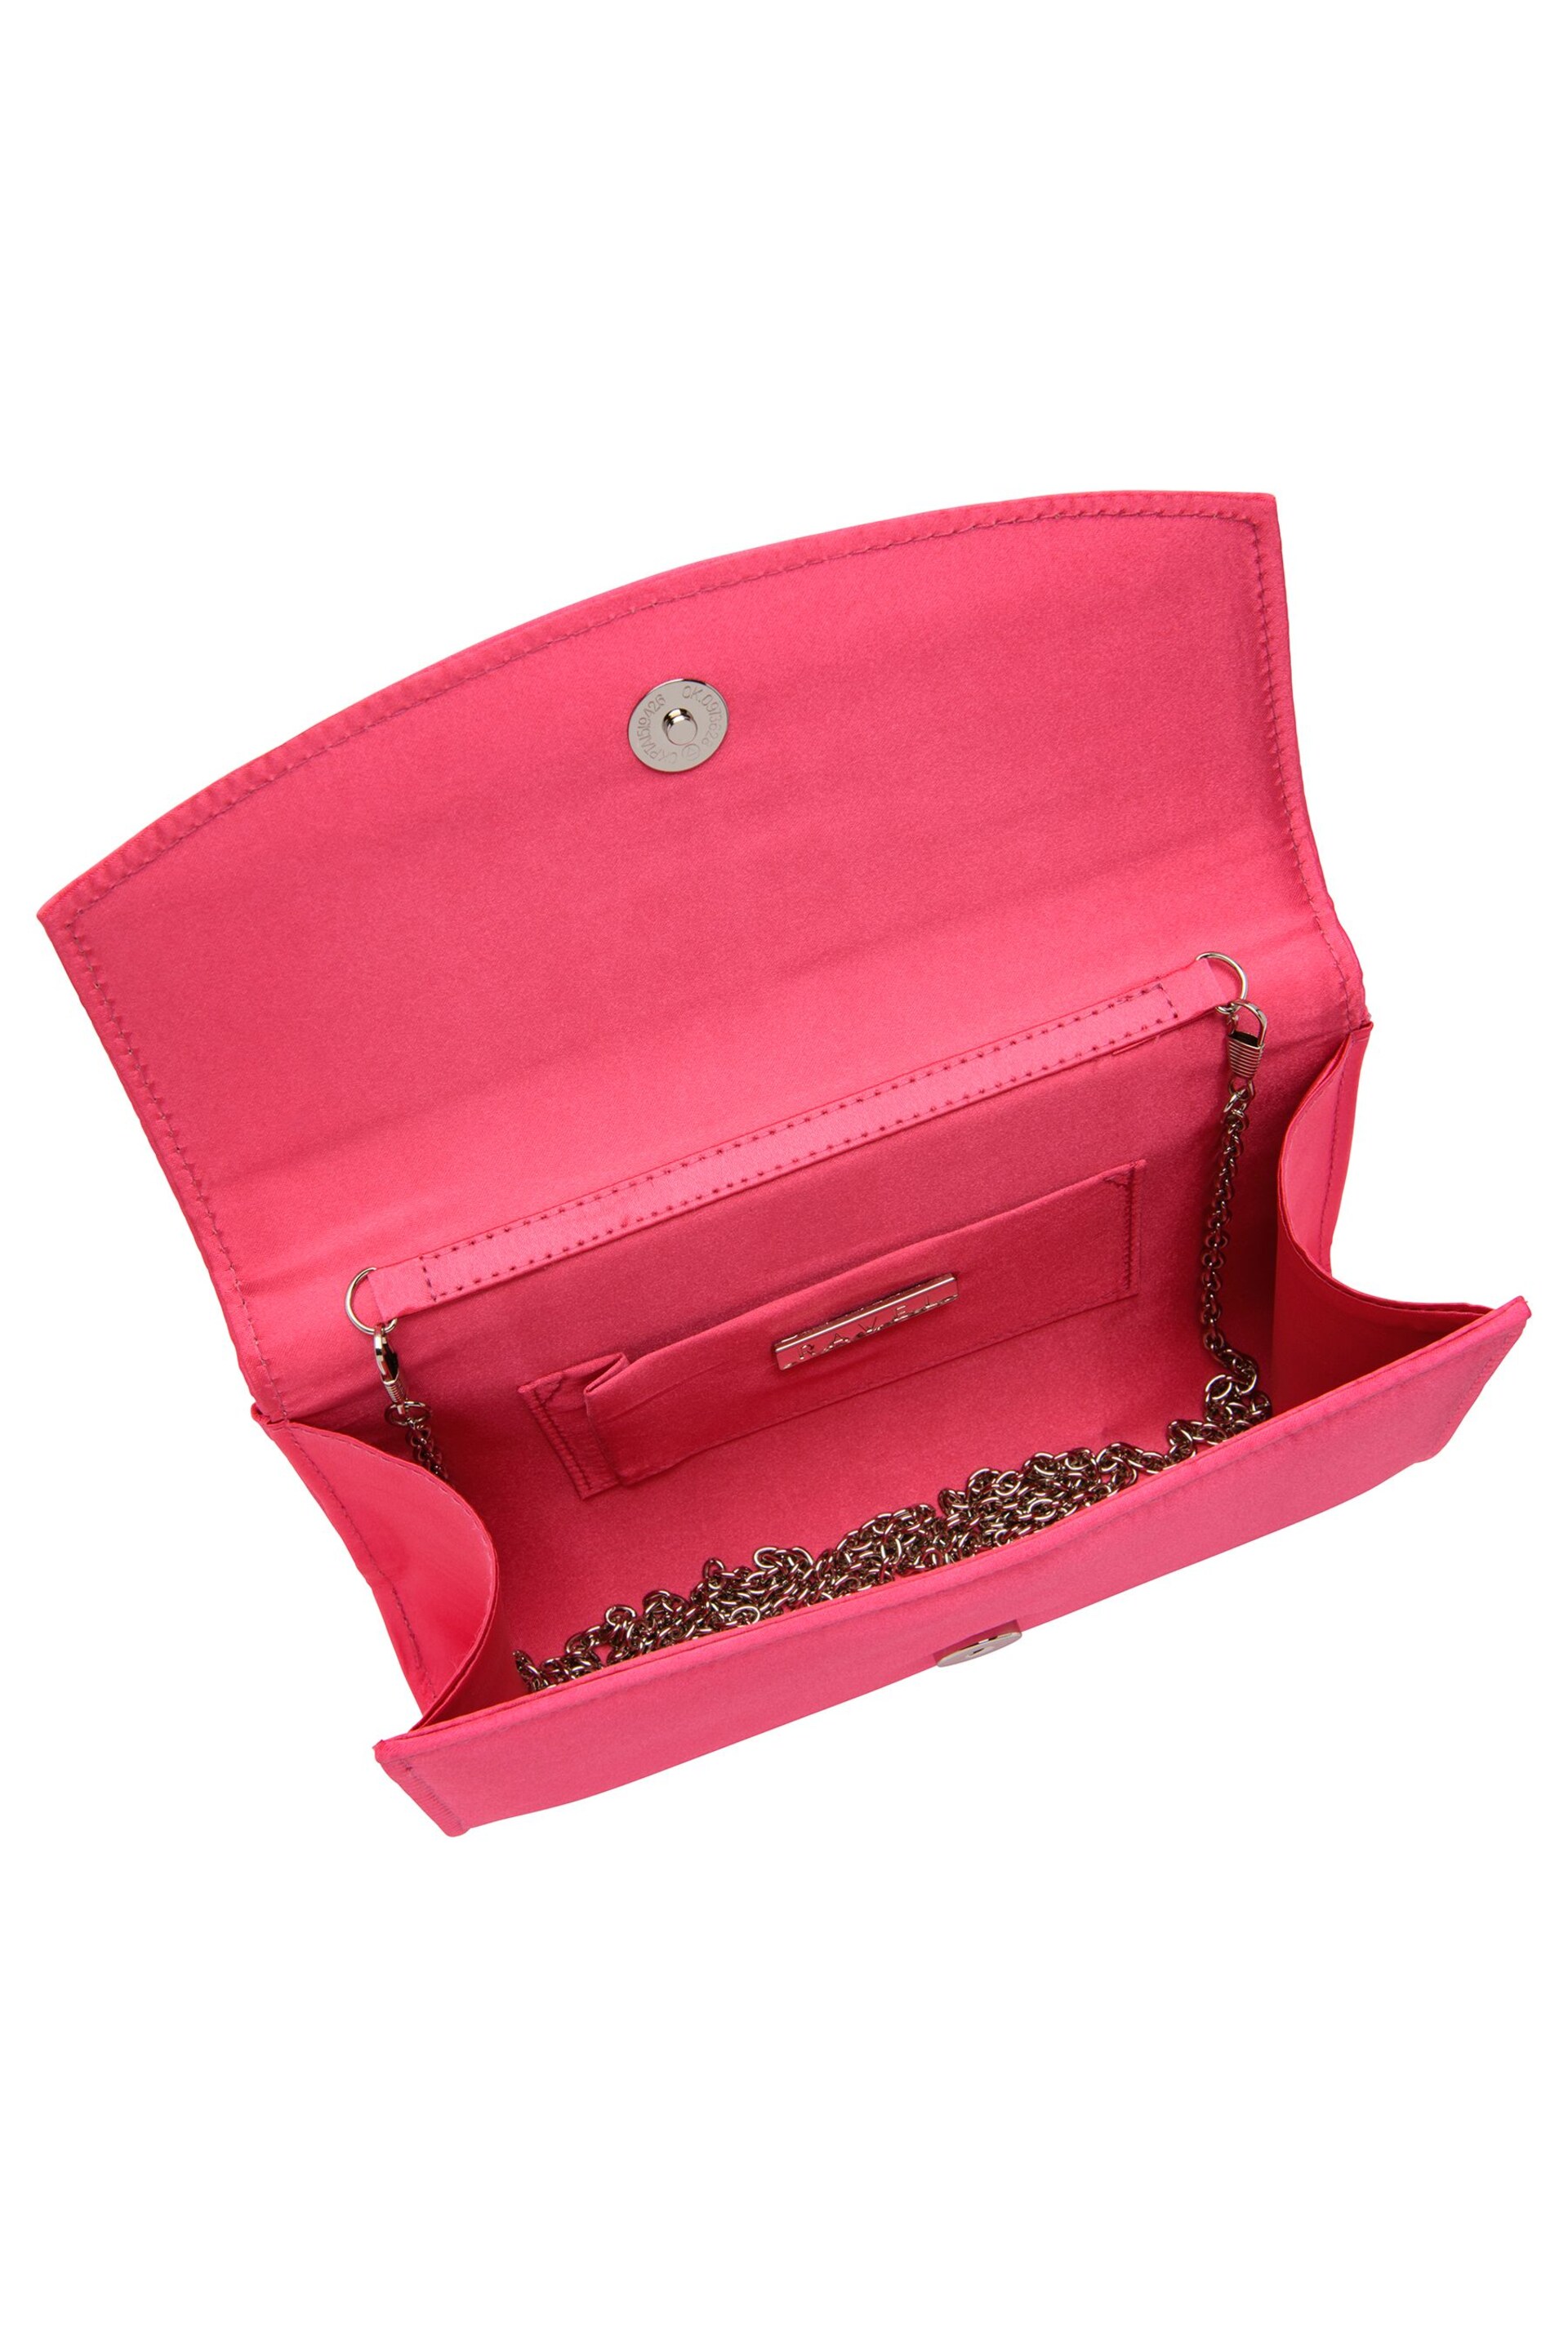 Ravel Pink Clutch Bag with Chain - Image 3 of 4